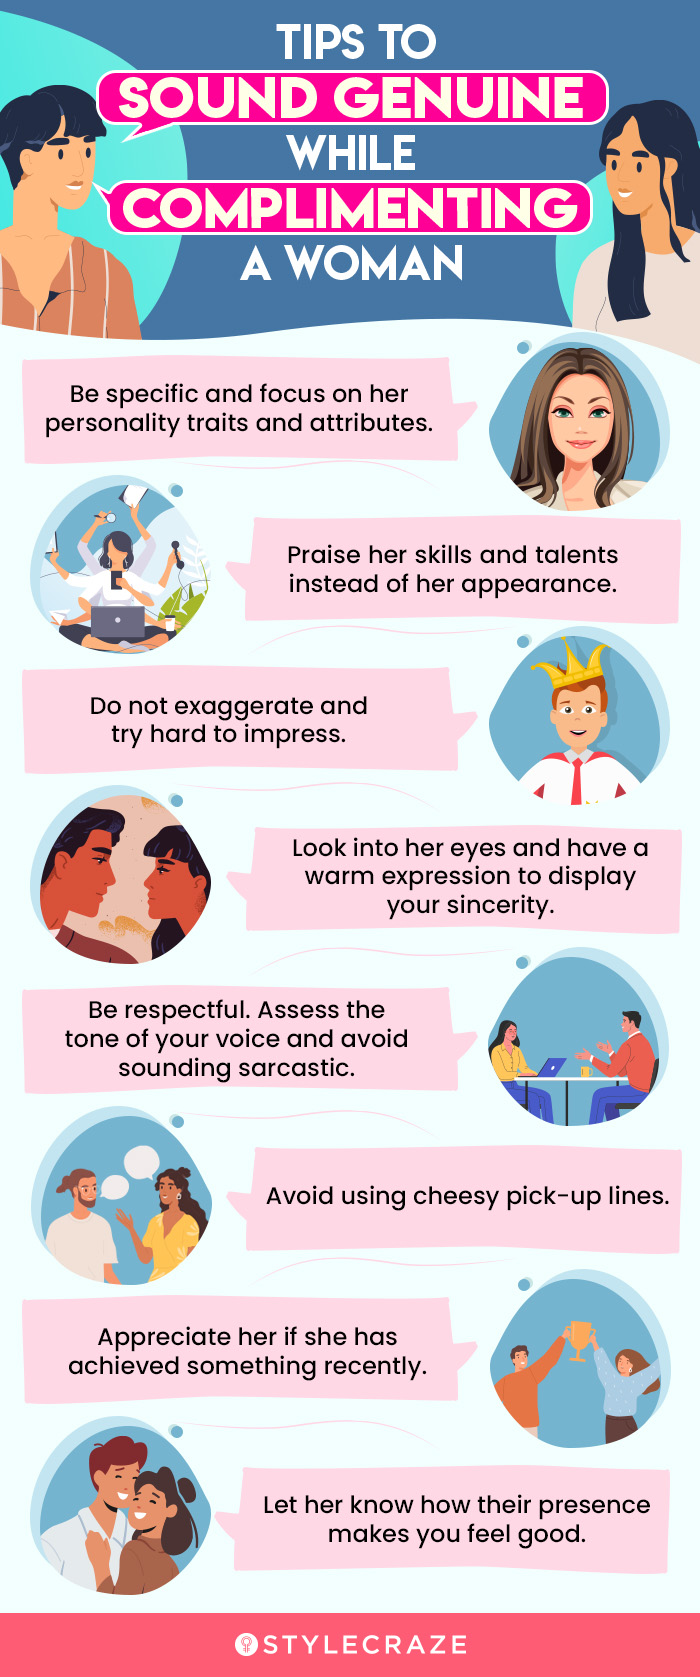 tips to sound genuine while complimenting a woman [infographic]